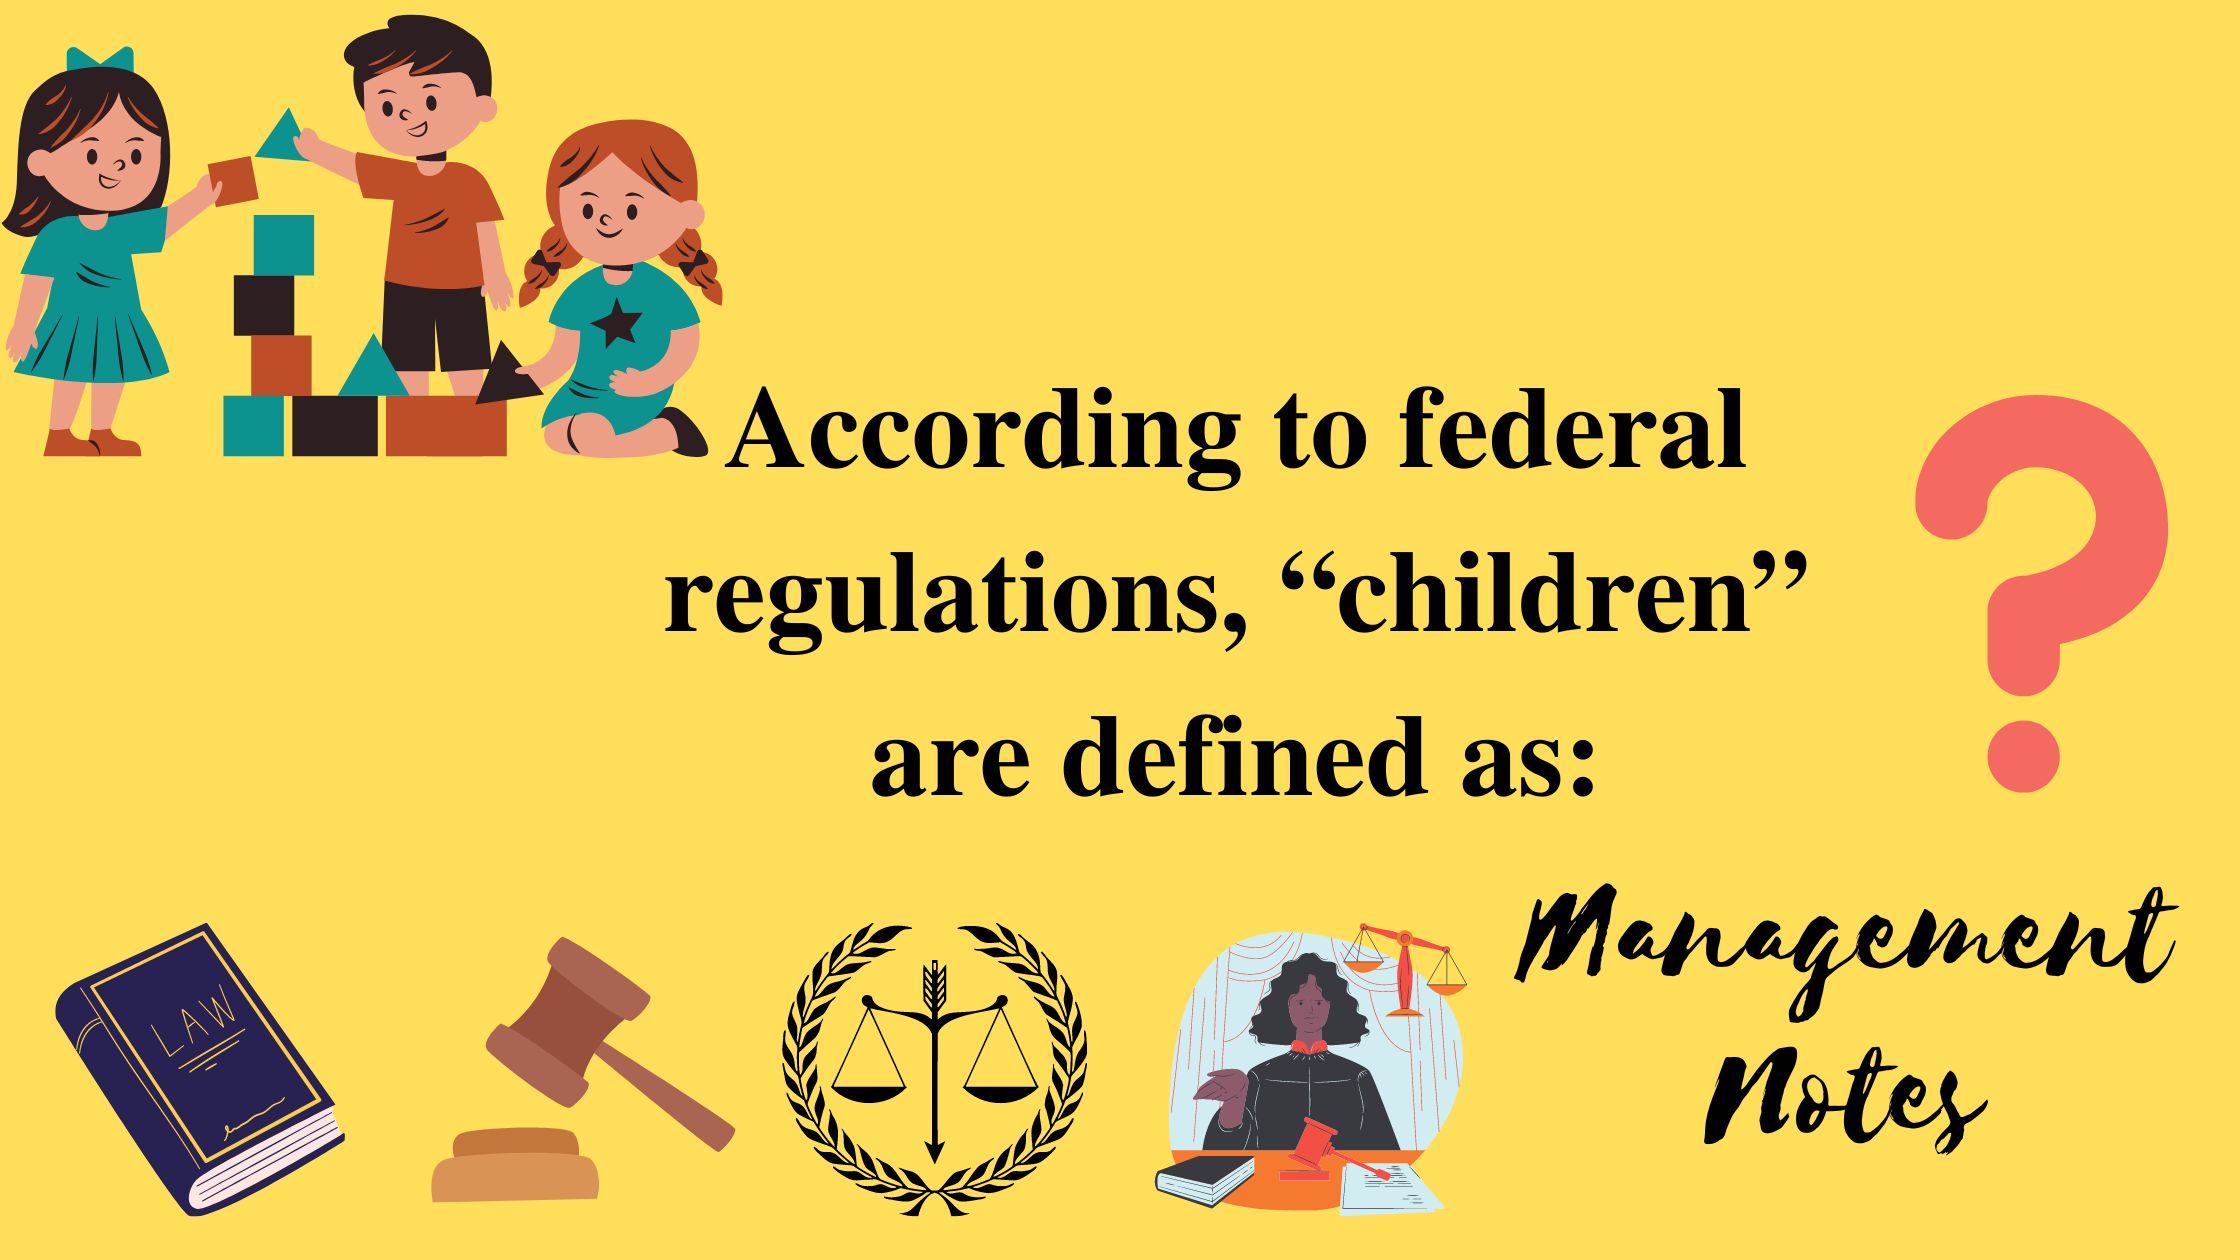 According to federal regulations, “children” are defined as: